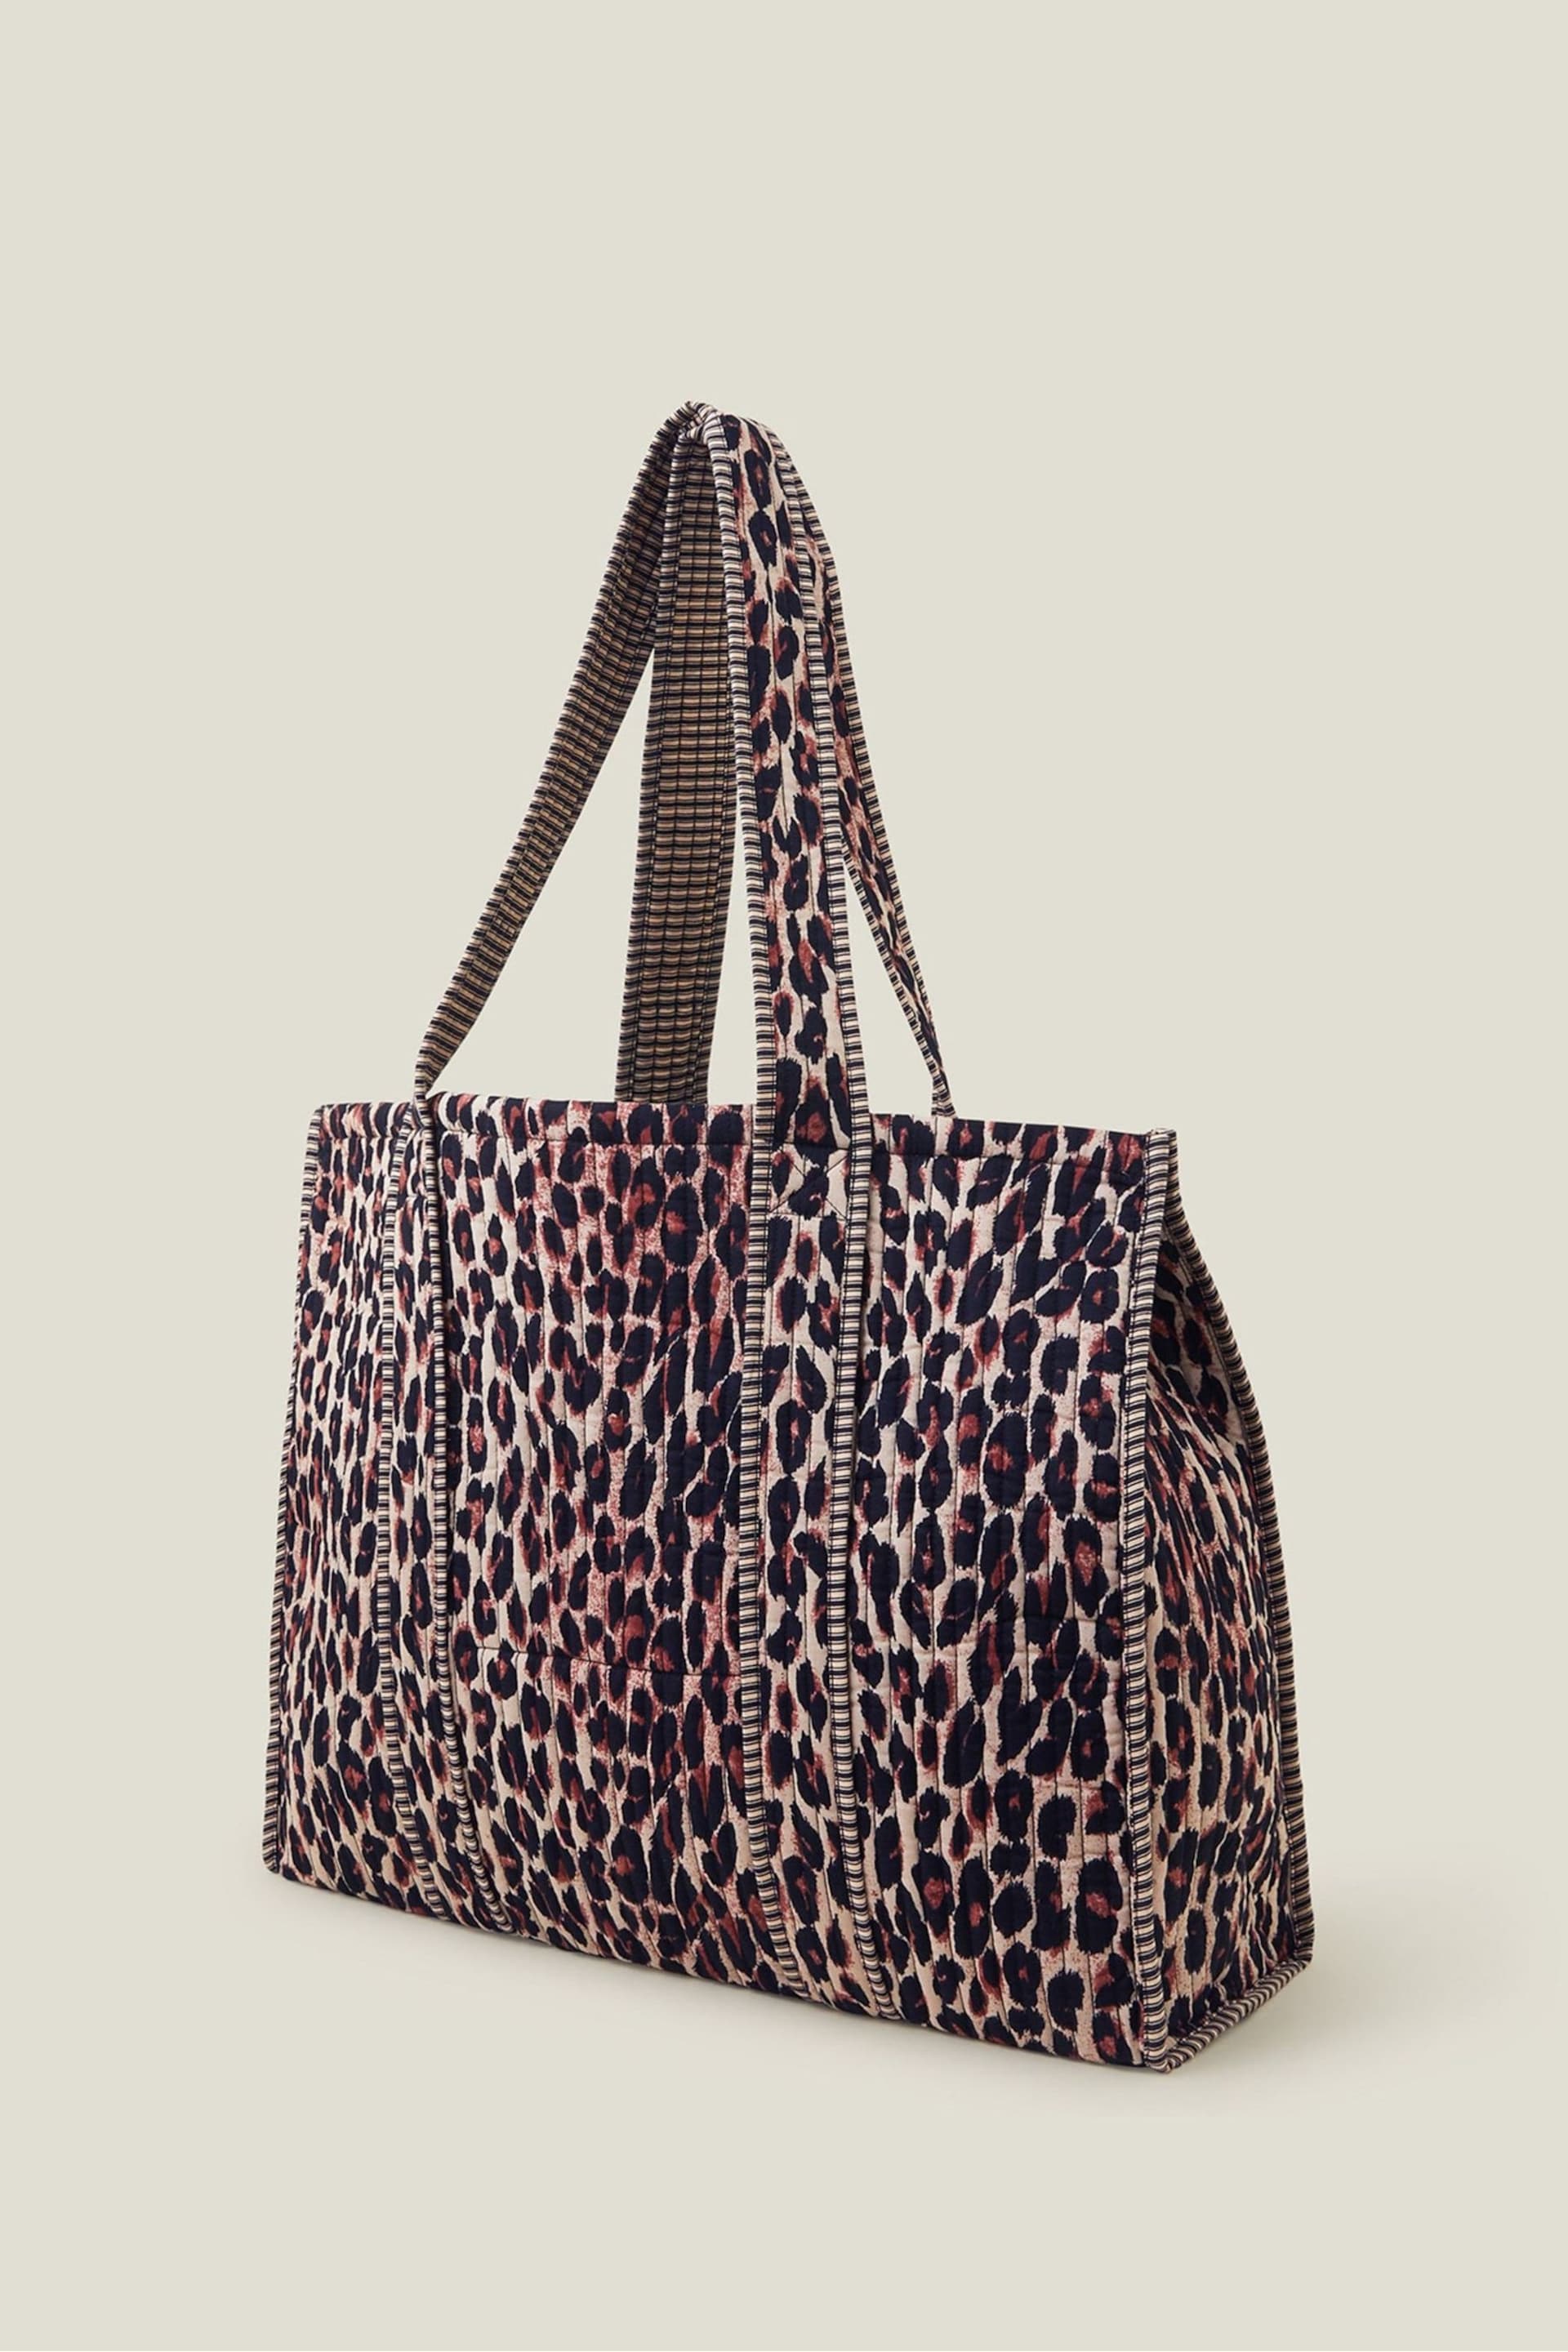 Accessorize Brown Leopard Print Quilted Shopper Bag - Image 3 of 4